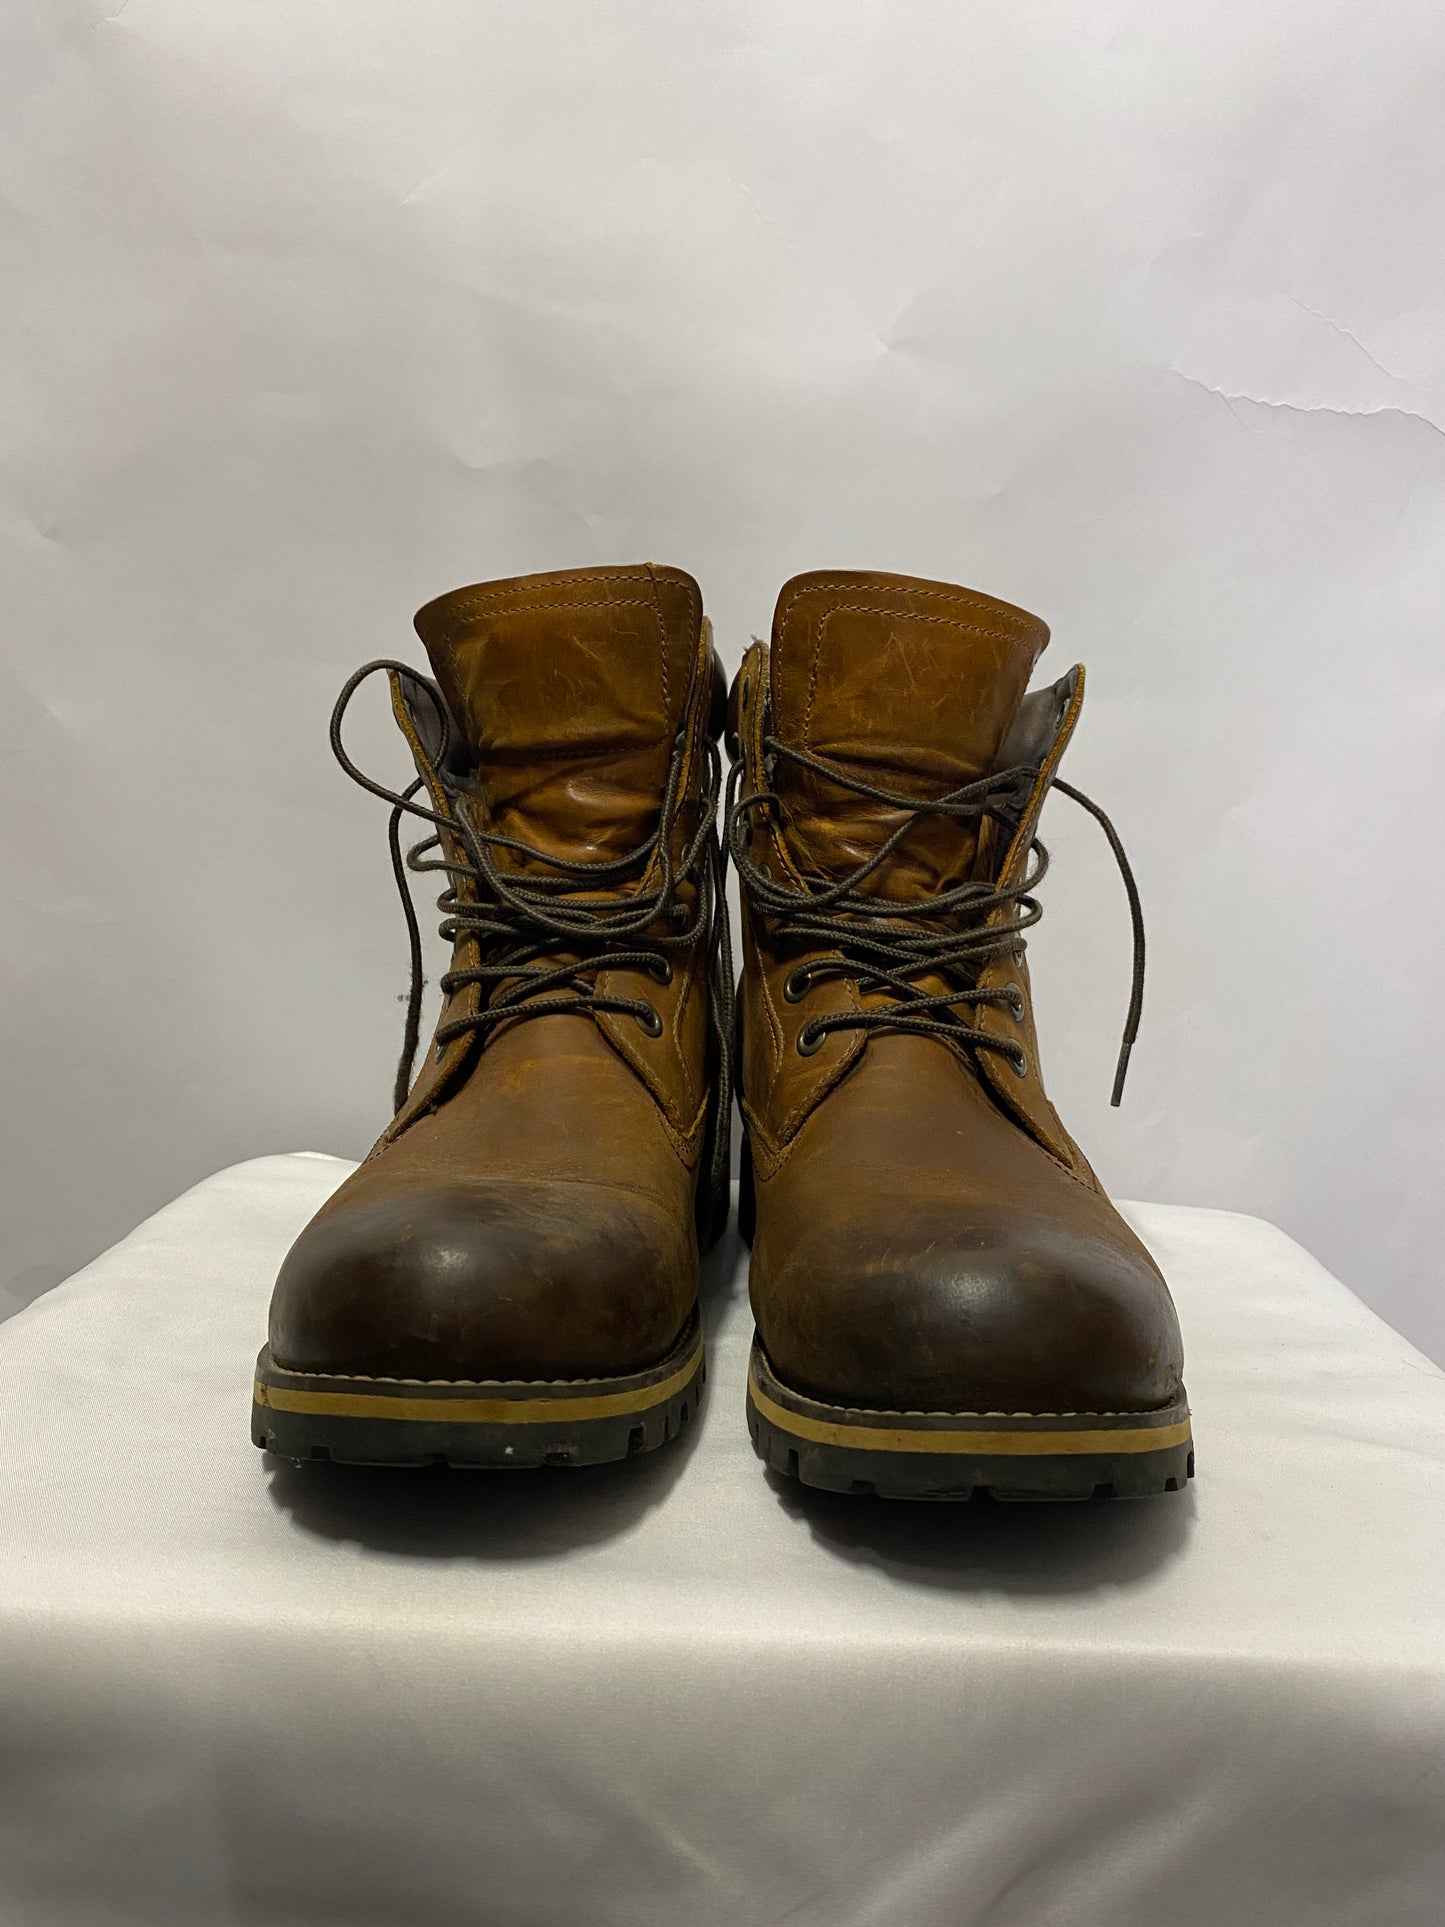 Timberland Brown Leather Waterproof Boots 9